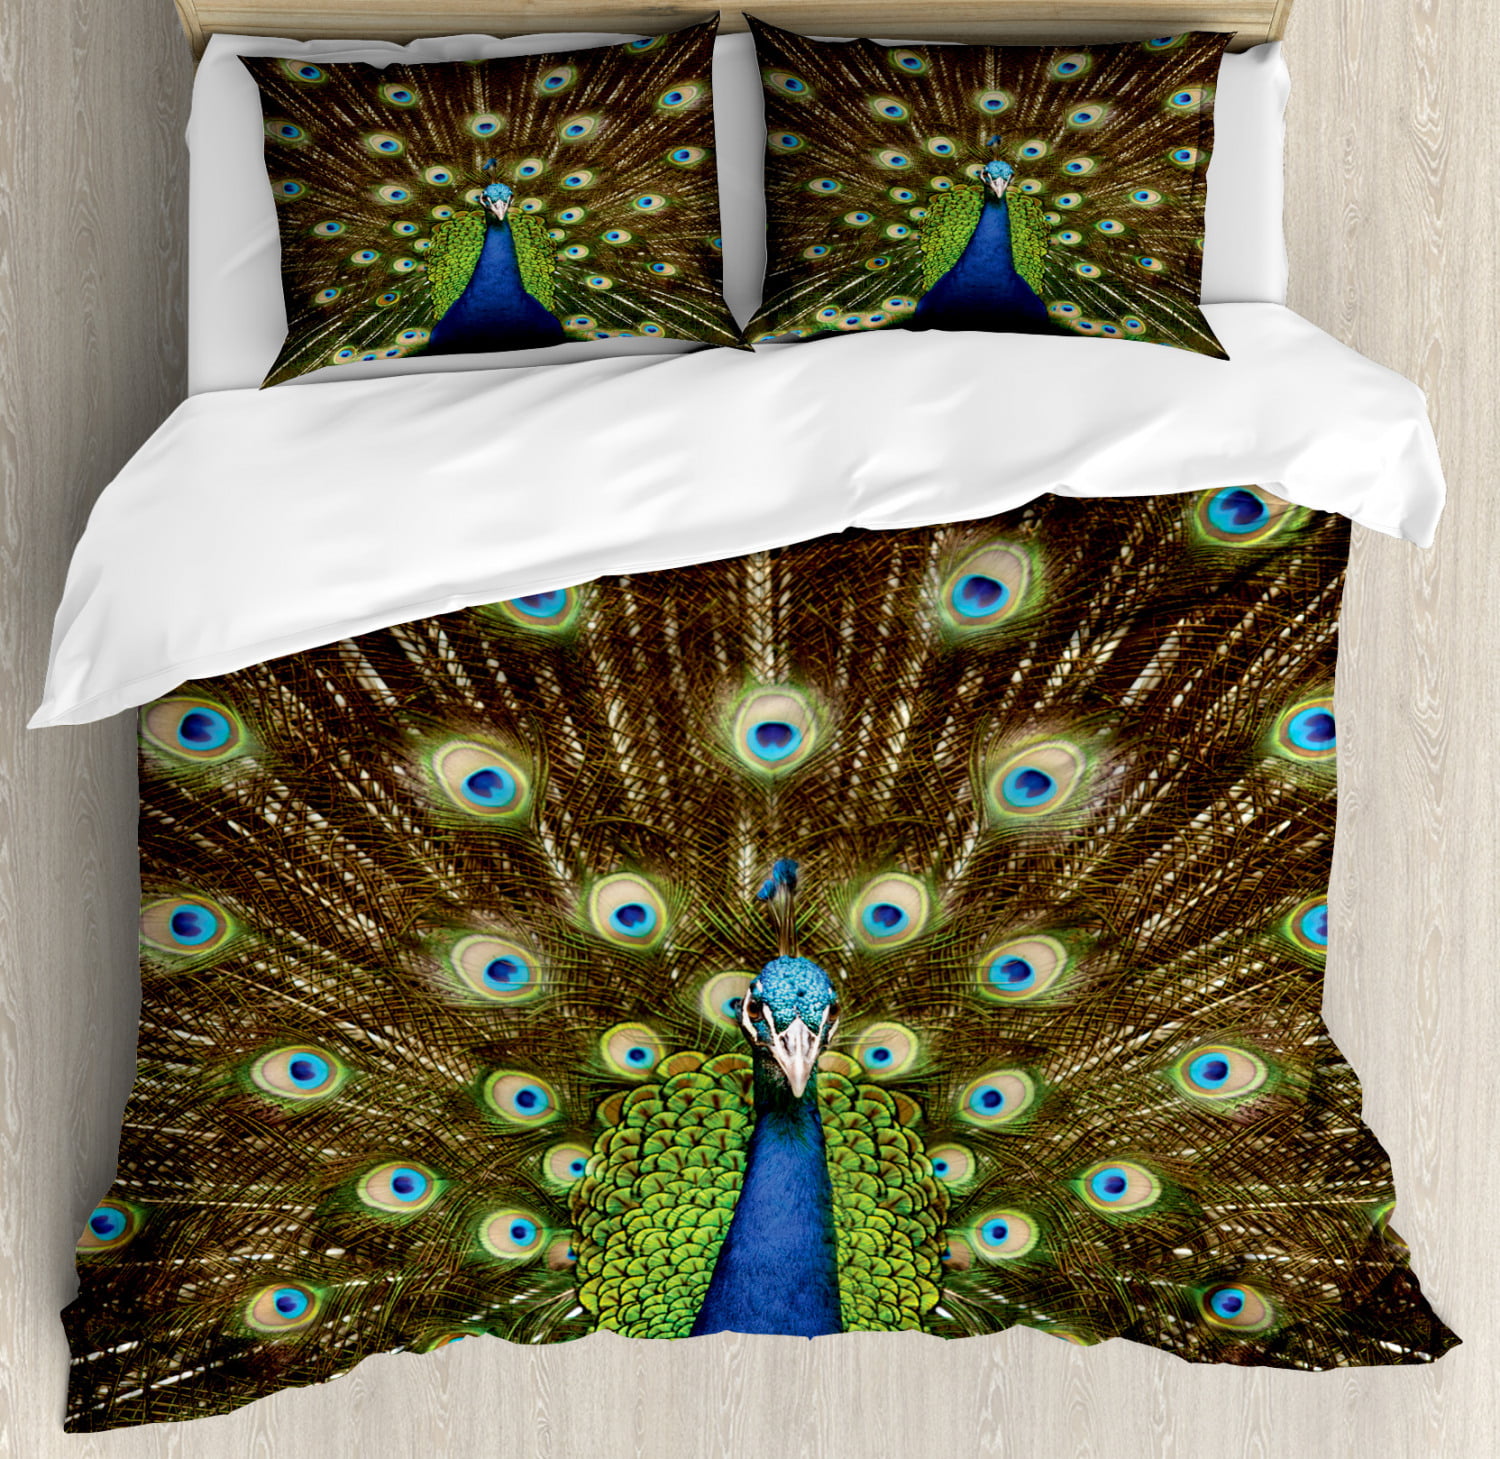 agentschap burgemeester Beurs Peacock Queen Size Duvet Cover Set, Portrait of Peacock with Feathers out  Vibrant Colors Birds Summer Garden, Decorative 3 Piece Bedding Set with 2  Pillow Shams, Navy Blue Green Brown, by Ambesonne -